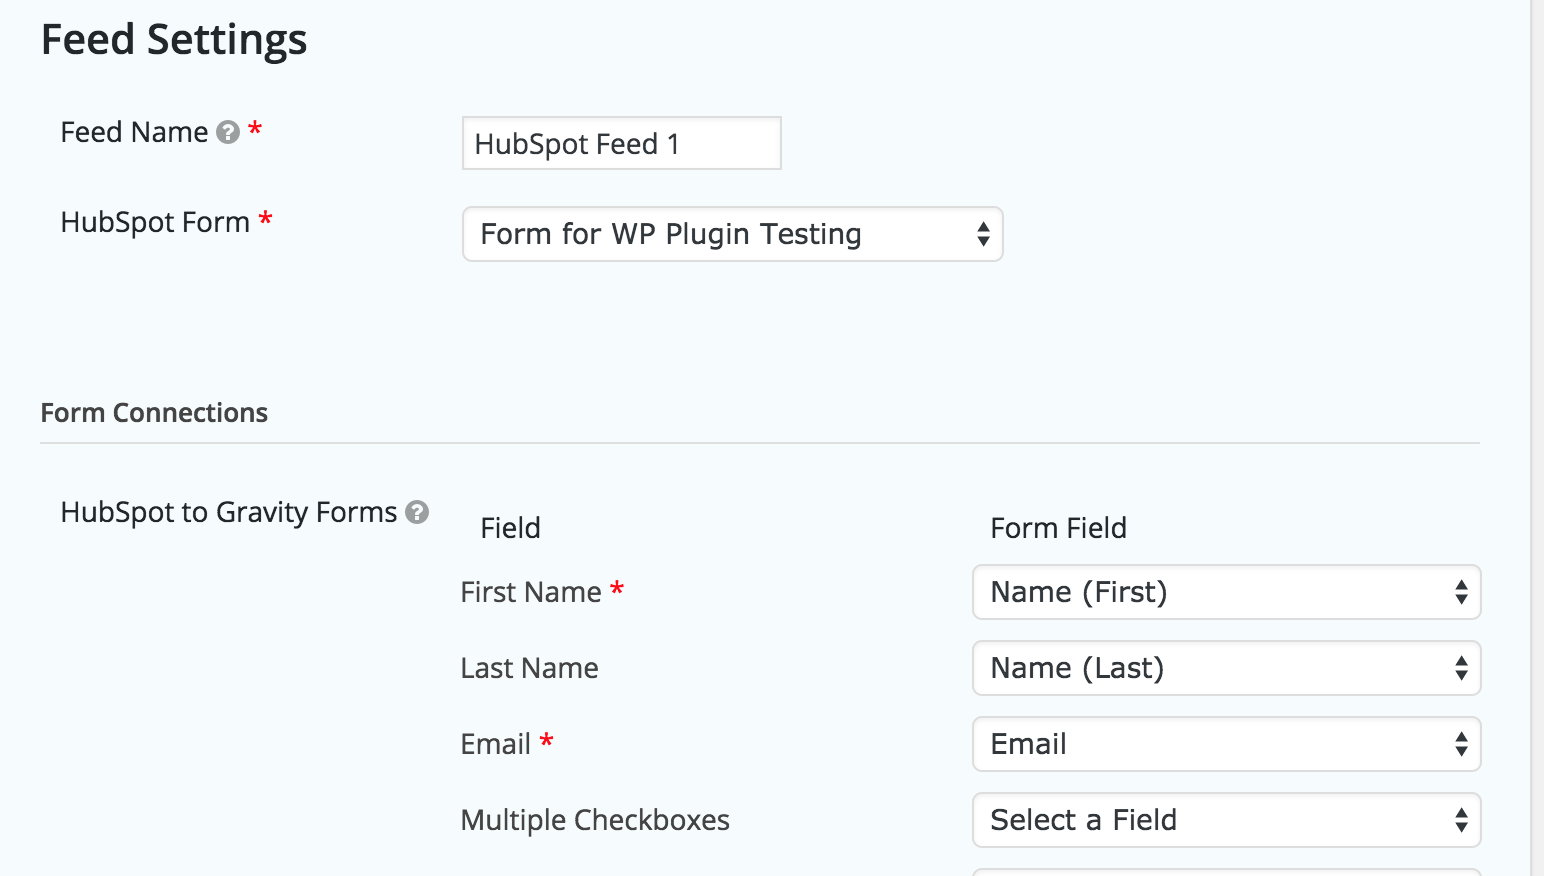 A glimpse at the settings for the HubSpot Feed connectivity